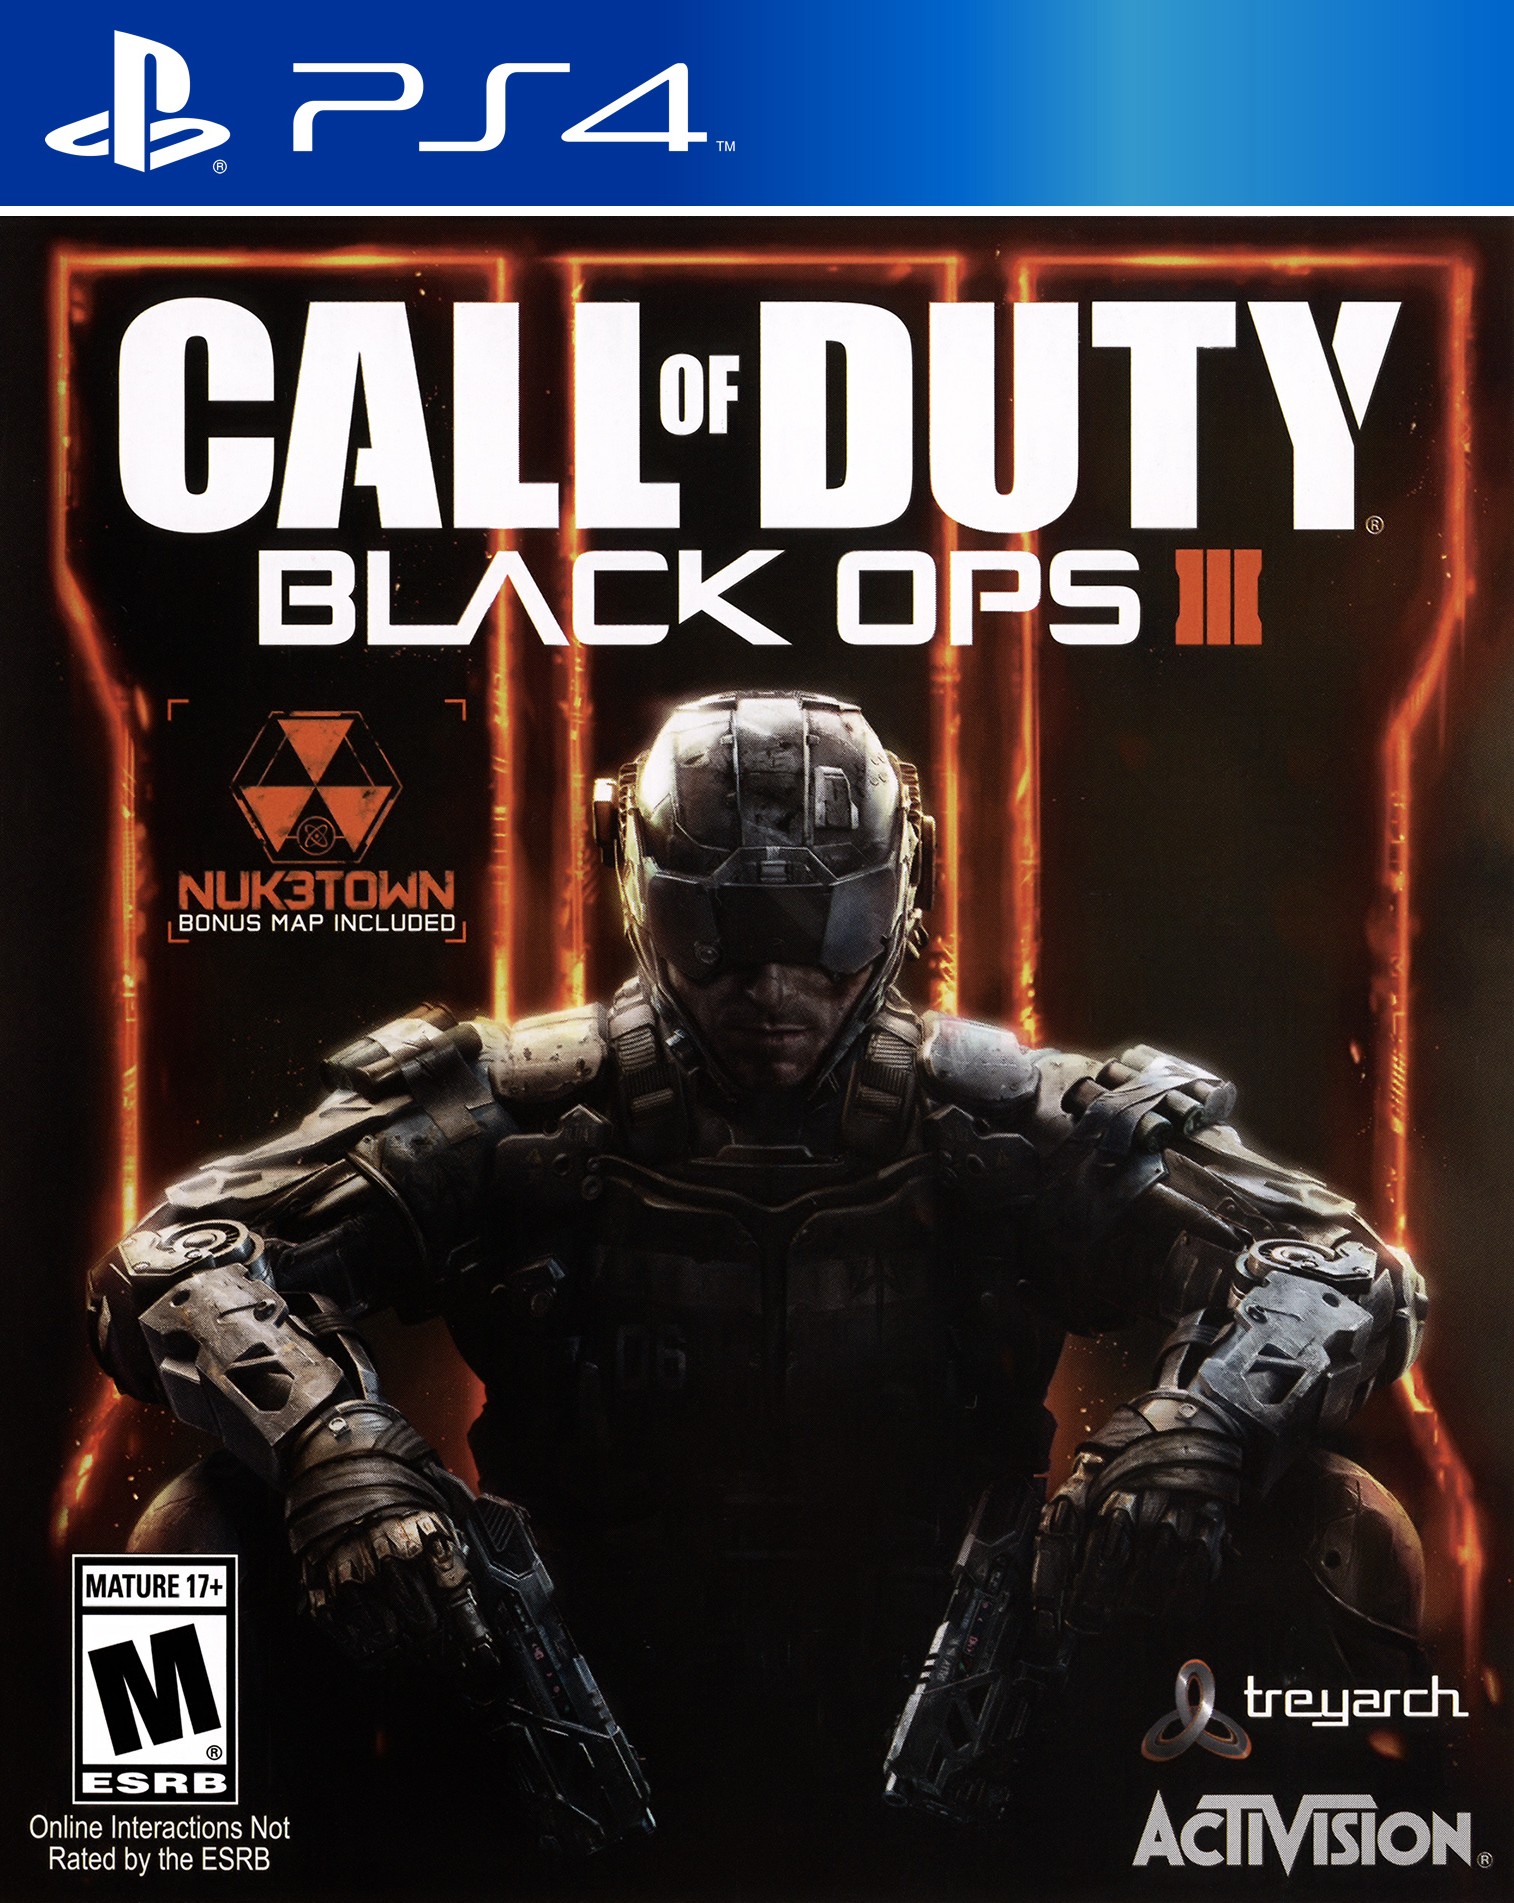 'Call of Duty: Black Ops 3'